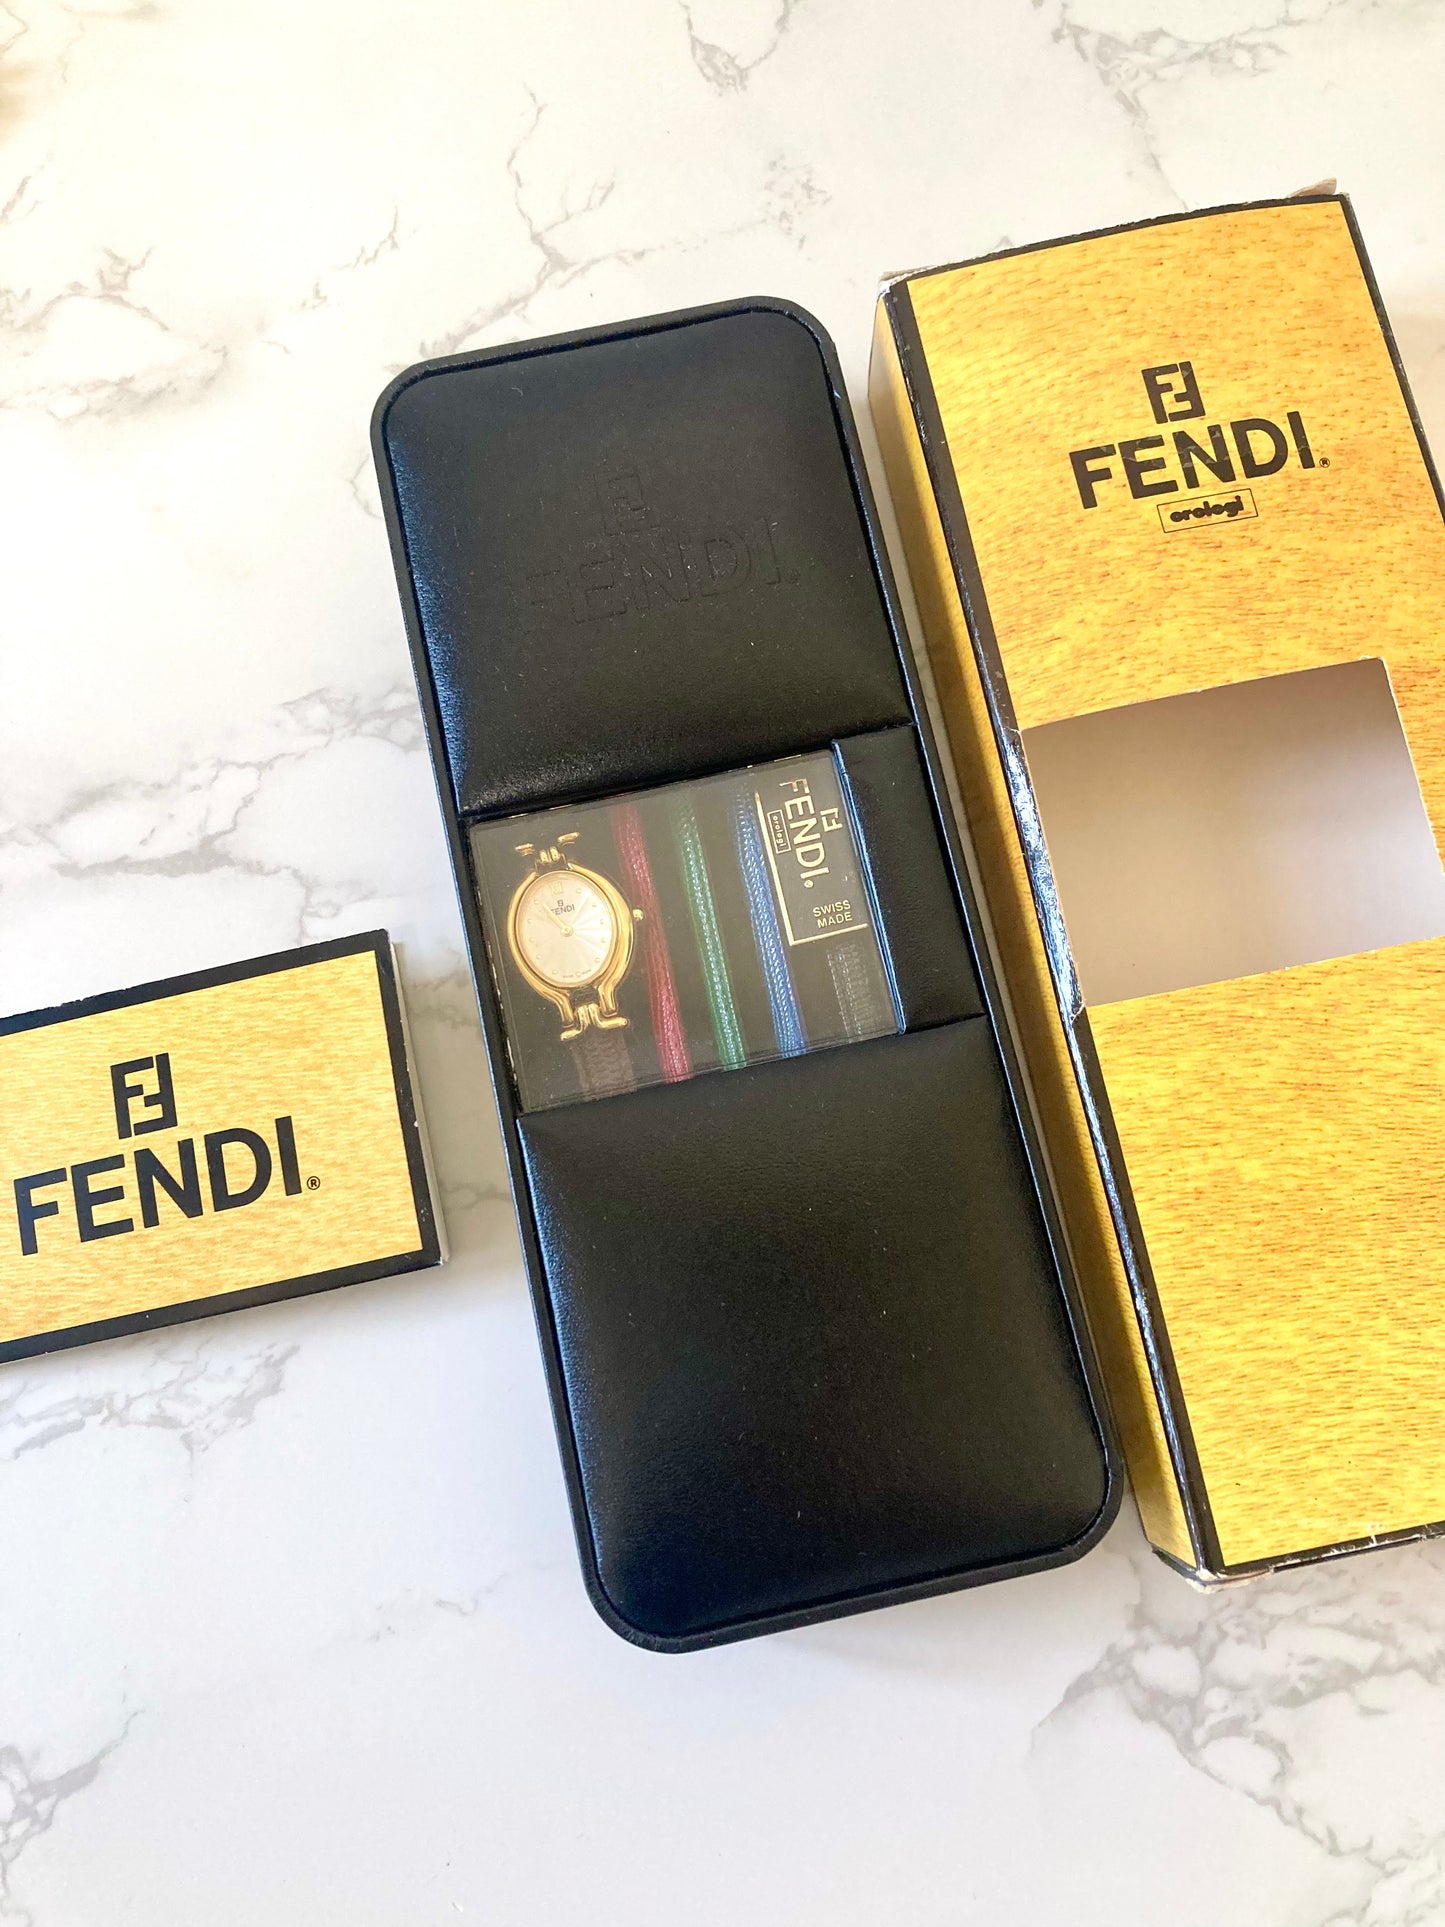 FENDI Brand New Full Set Watch with 5 Changeable Leather Straps